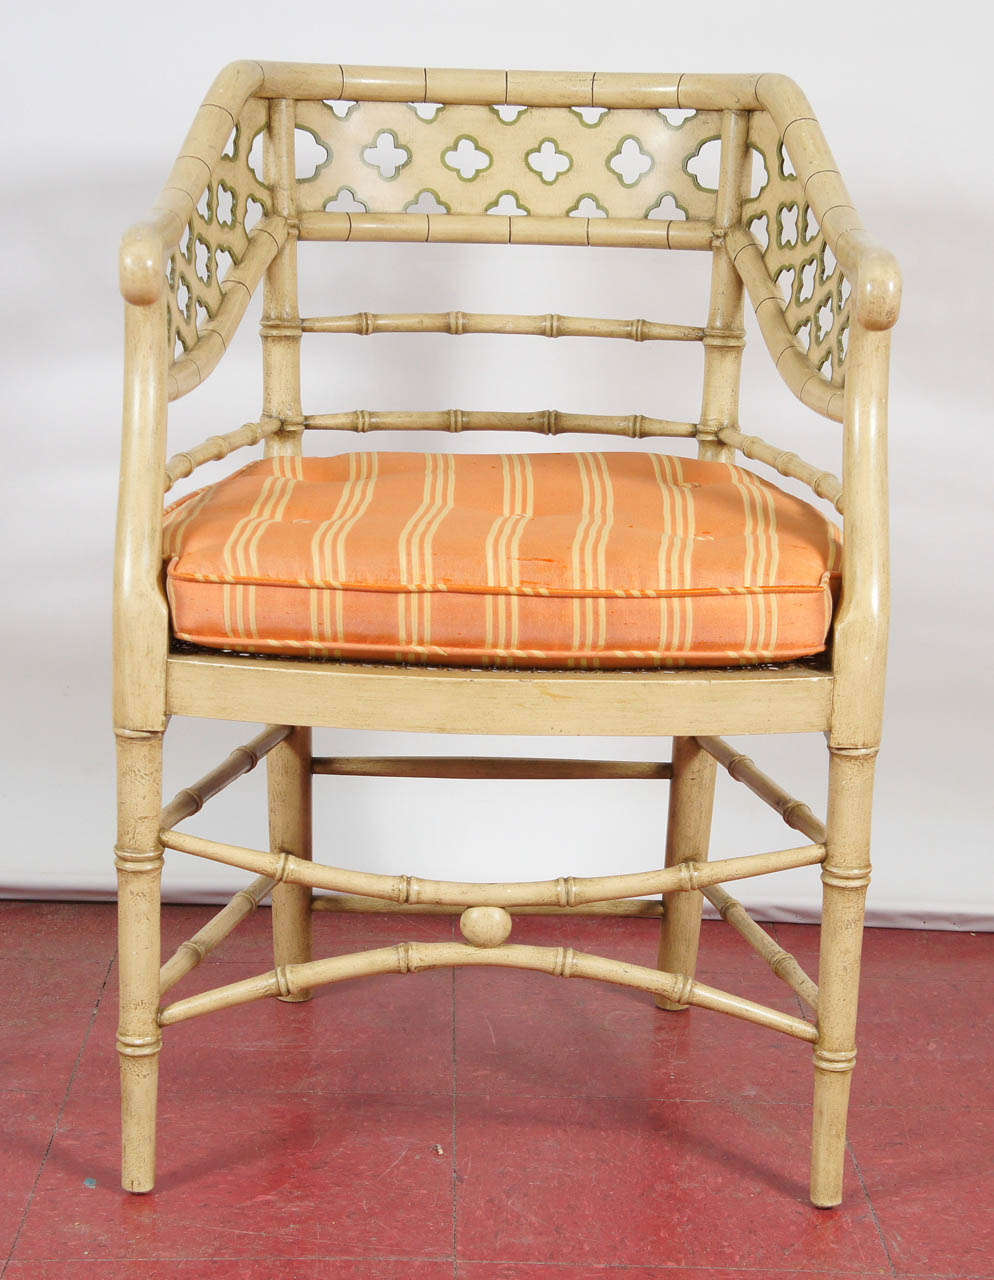 American Regency-Style Faux Bamboo Painted Chairs, Pair